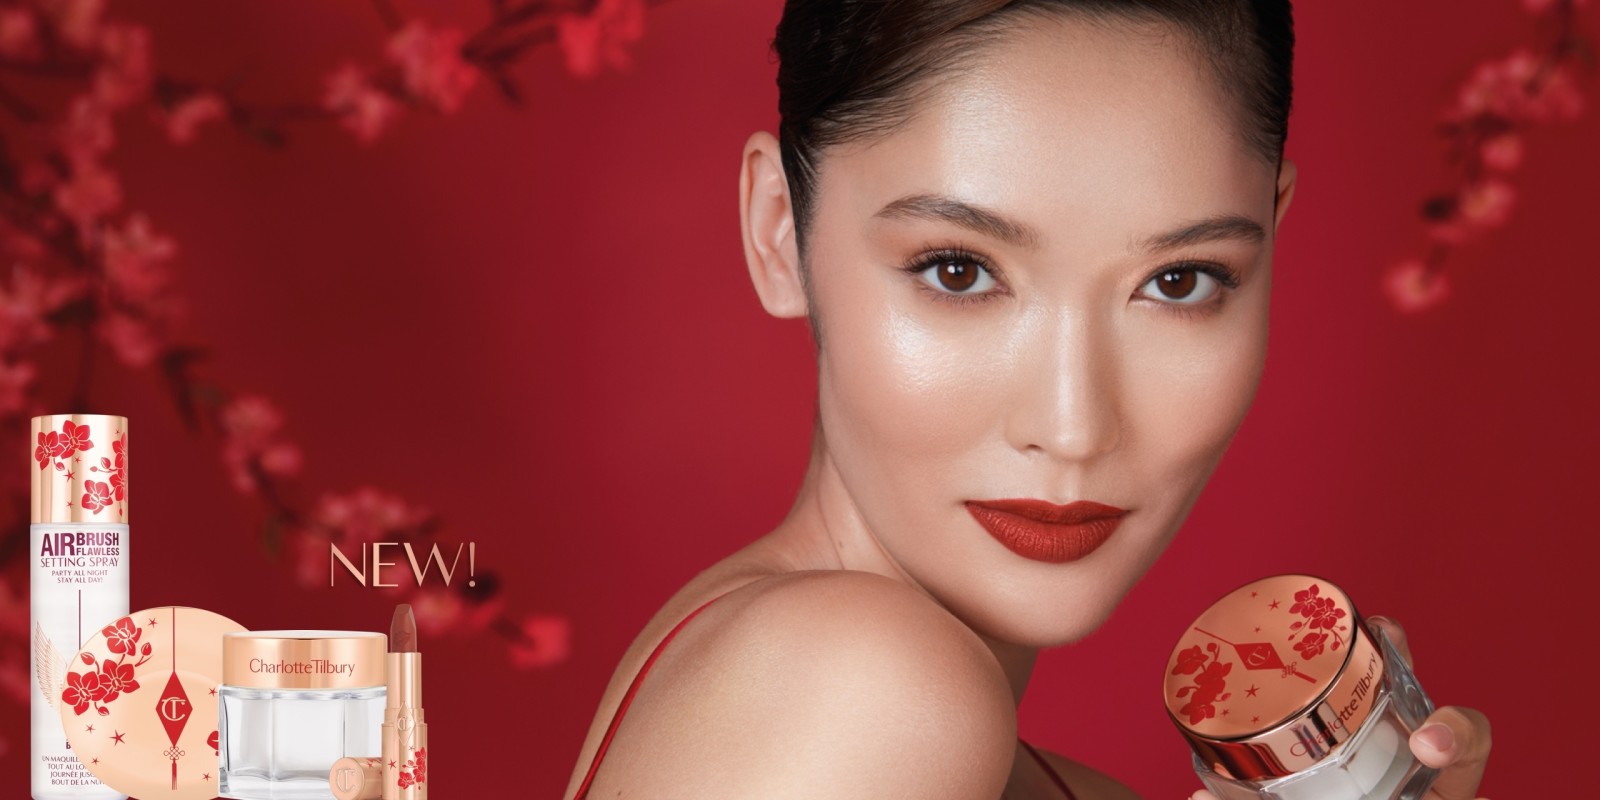 A fair skin model wearing matte burnt-orange red lipstick with rose gold shimmery eye makeup and holding a face cream with a gold-coloured lid with red cherry blossoms on it.